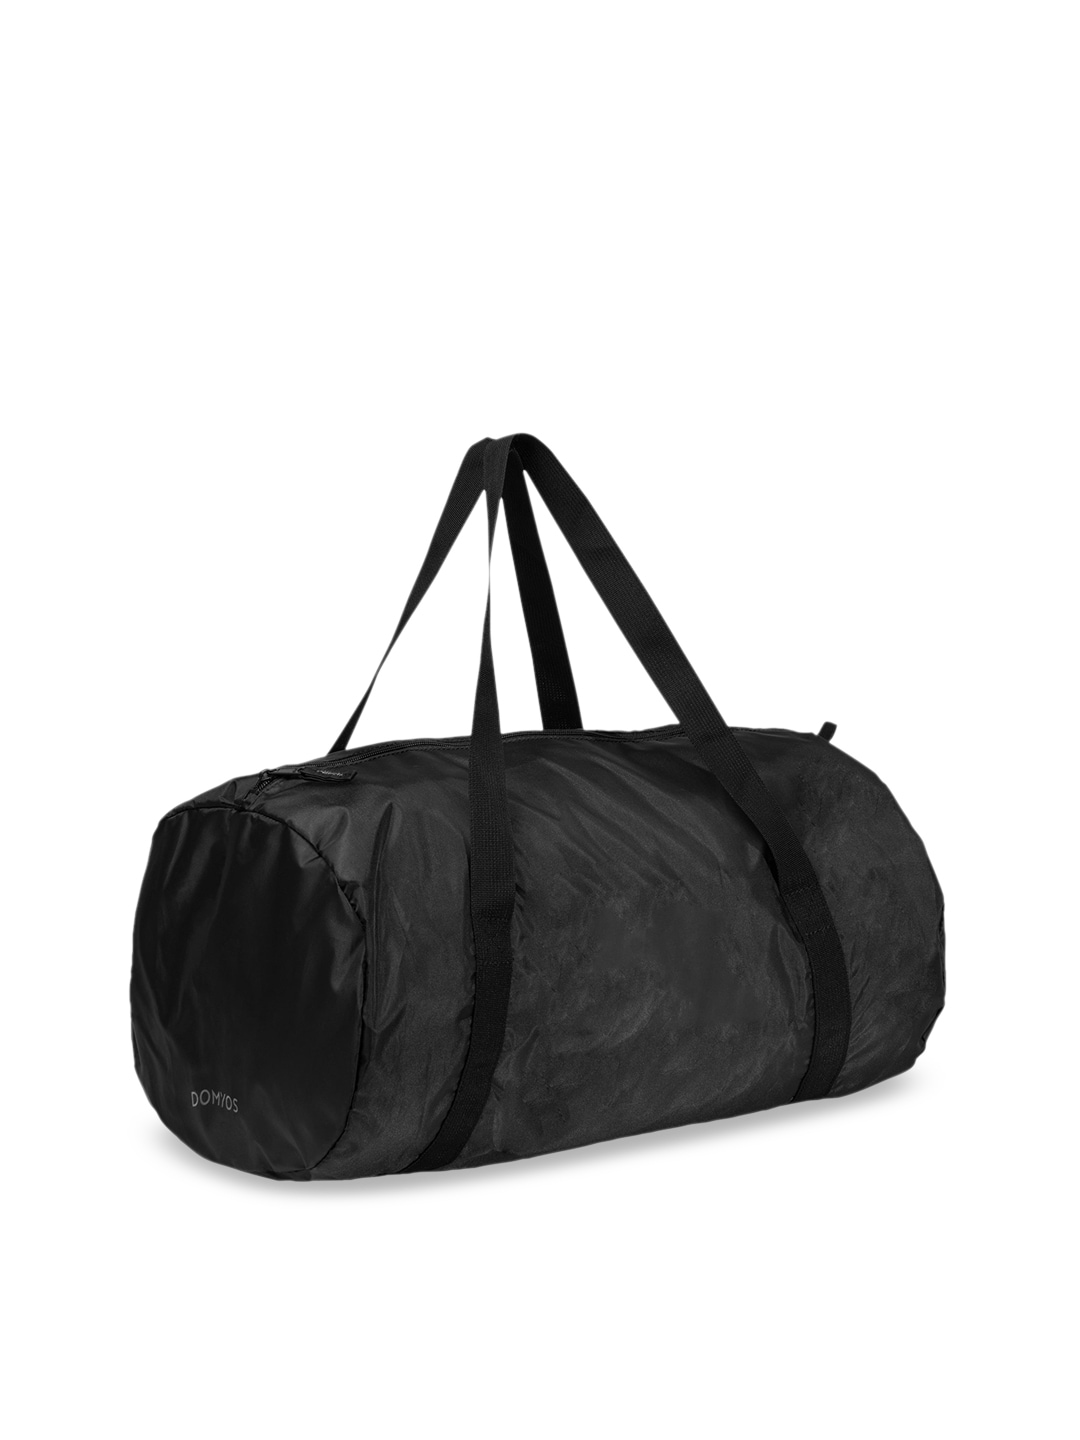 Domyos by Decathlon Unisex Black Fitness 30L Foldable Duffle Bag Price in India